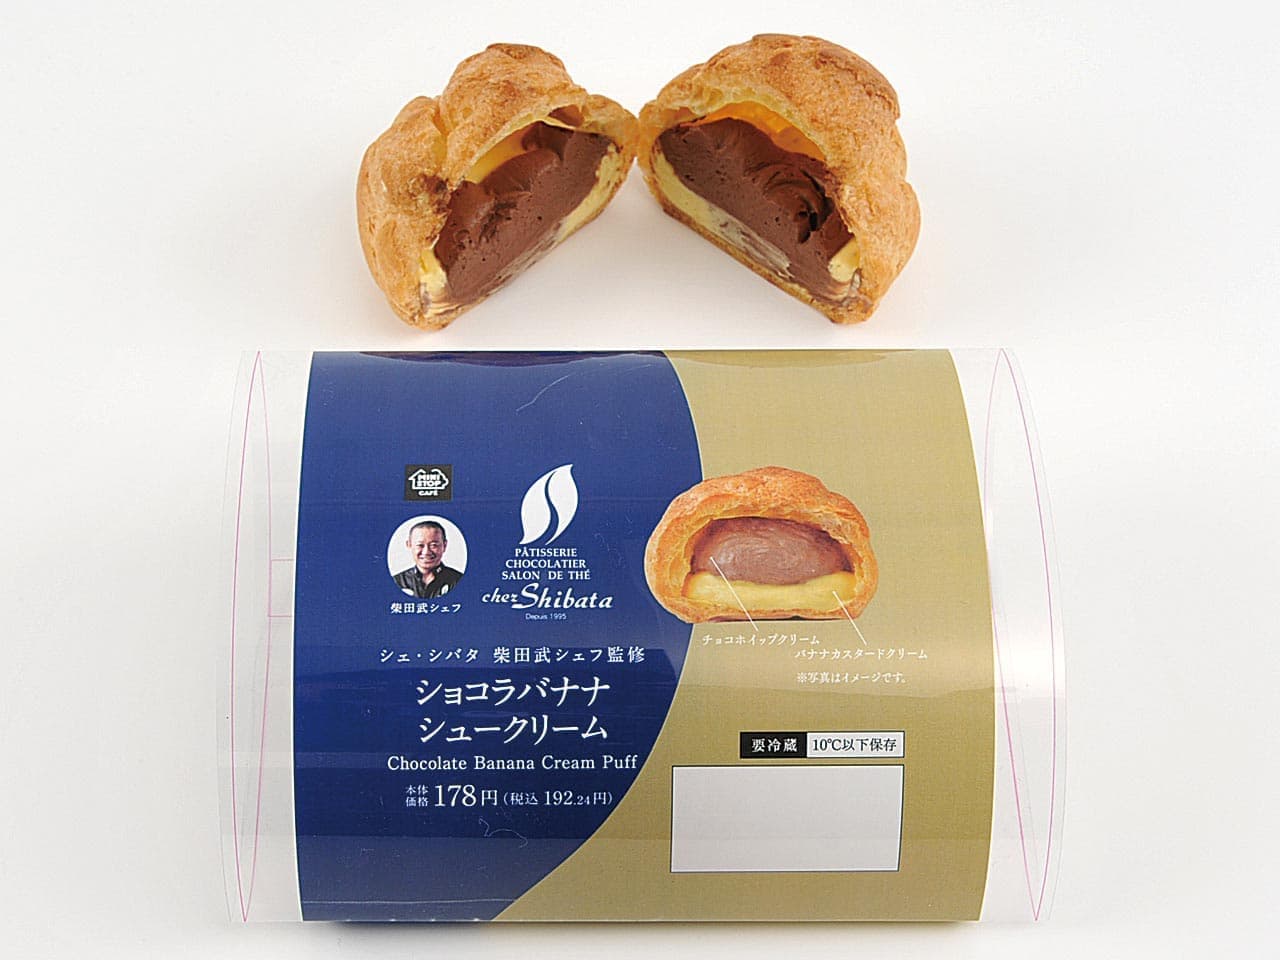 Ministop "Chocolat Banana Puff Pastry" package